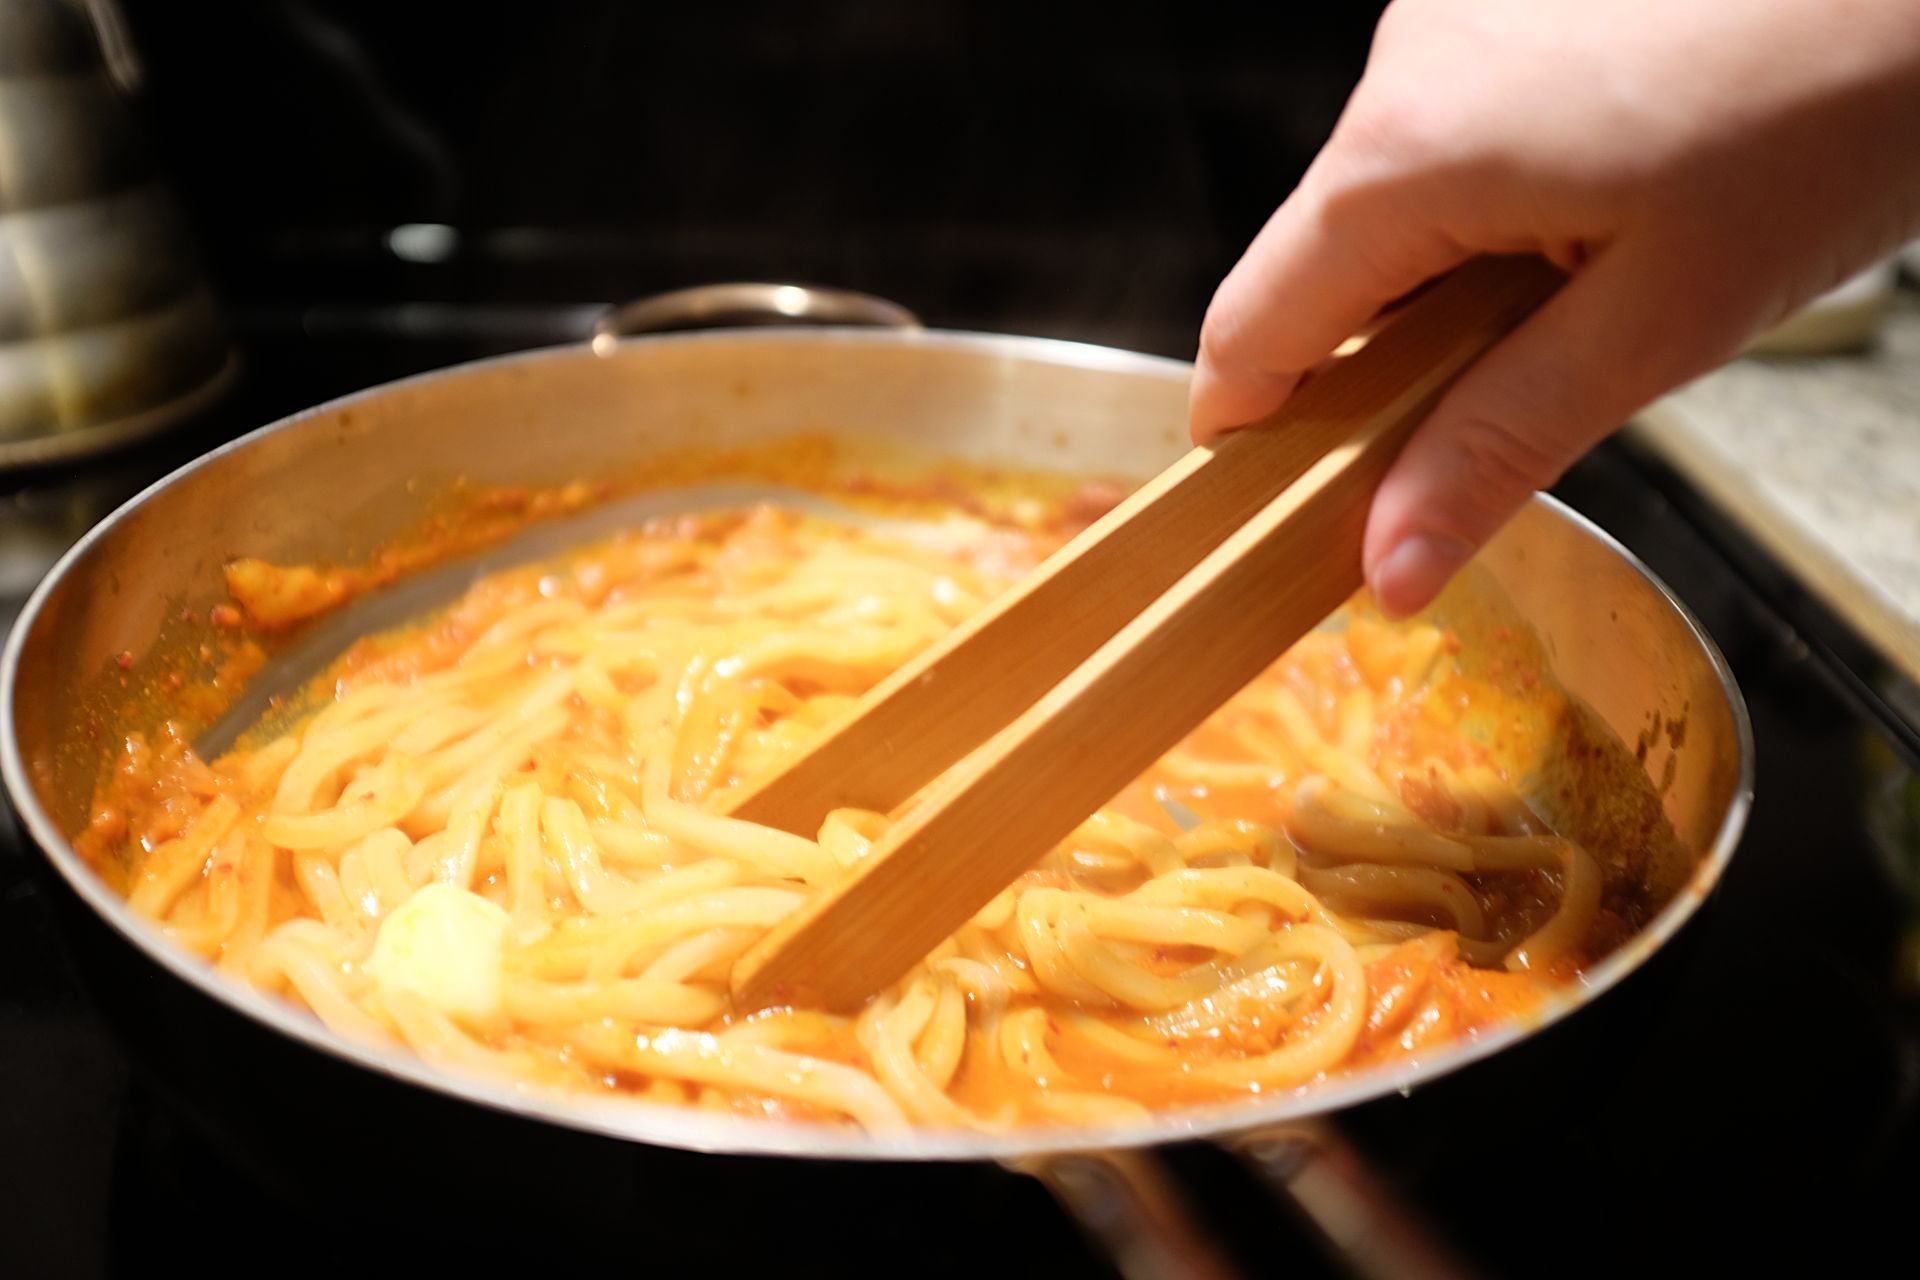 A white woman's hand stirs udon noodles in a reddish sauce with wooden tongs